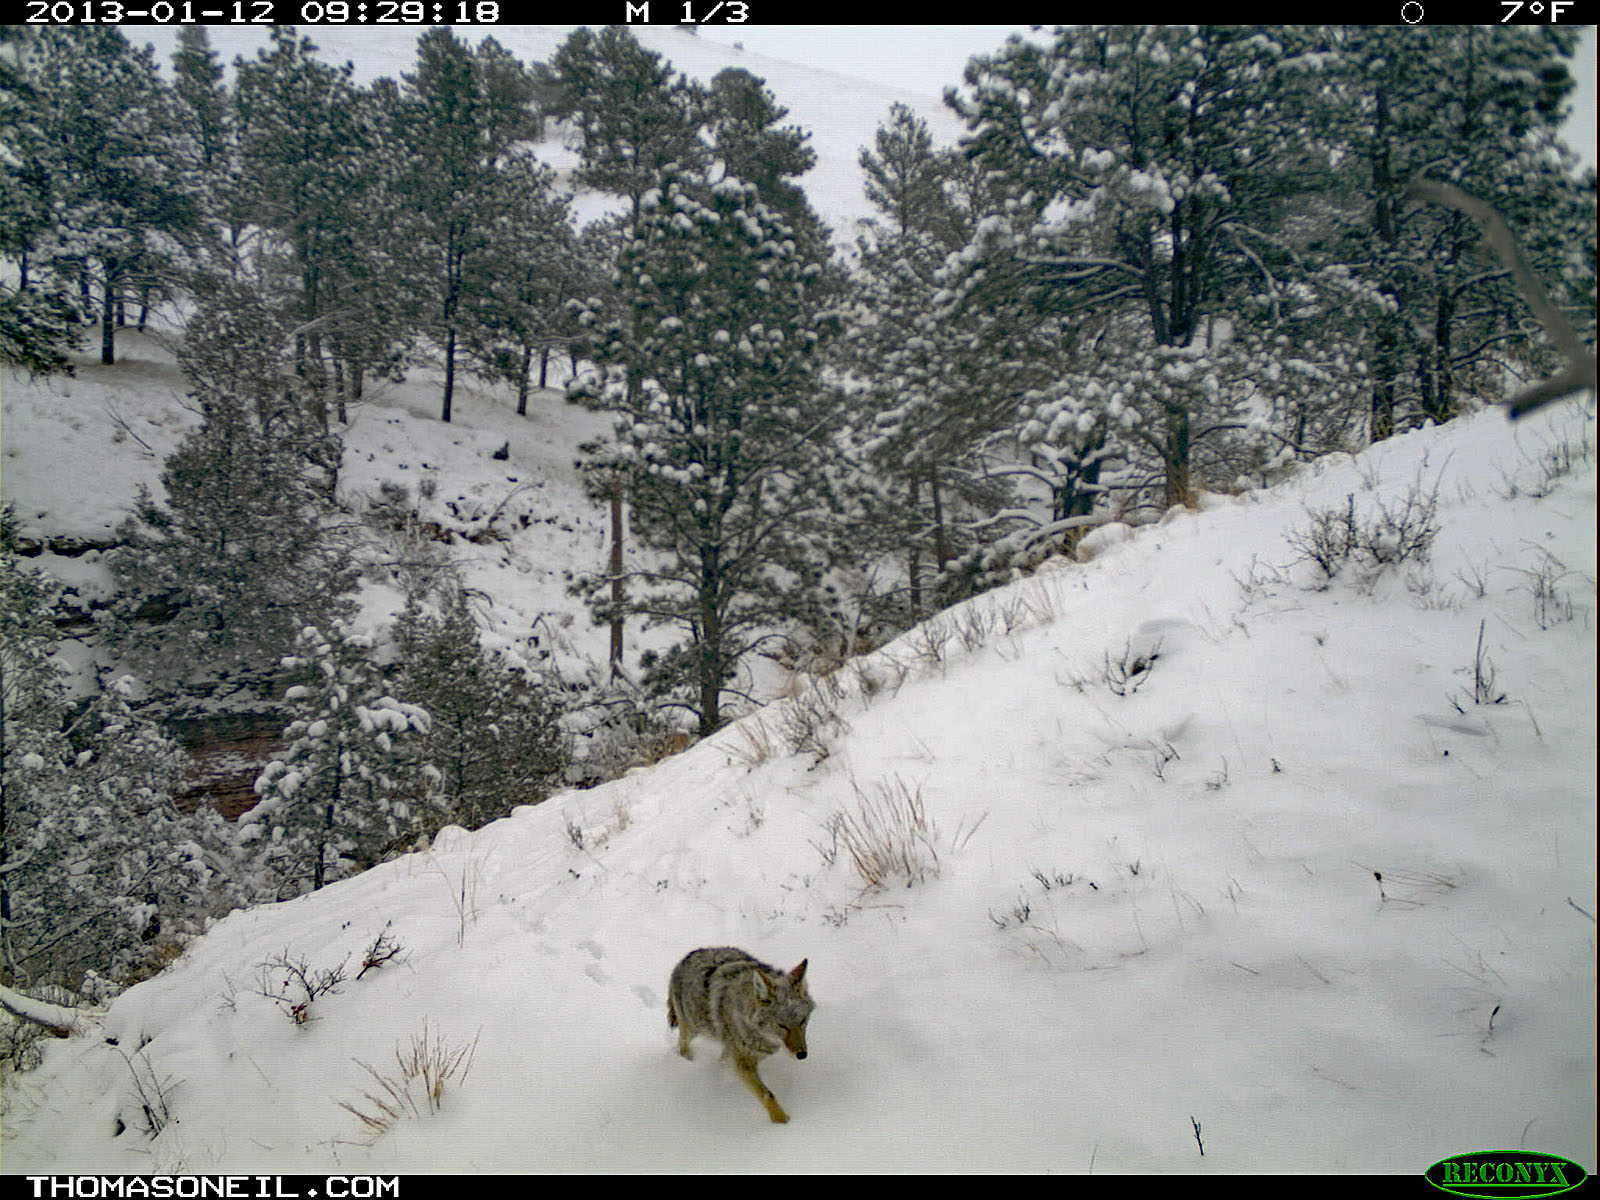 Coyote trudges through the snow, trailcam photo from Jan. 12, 2013, Wind Cave National Park, South Dakota.  Click for next photo.